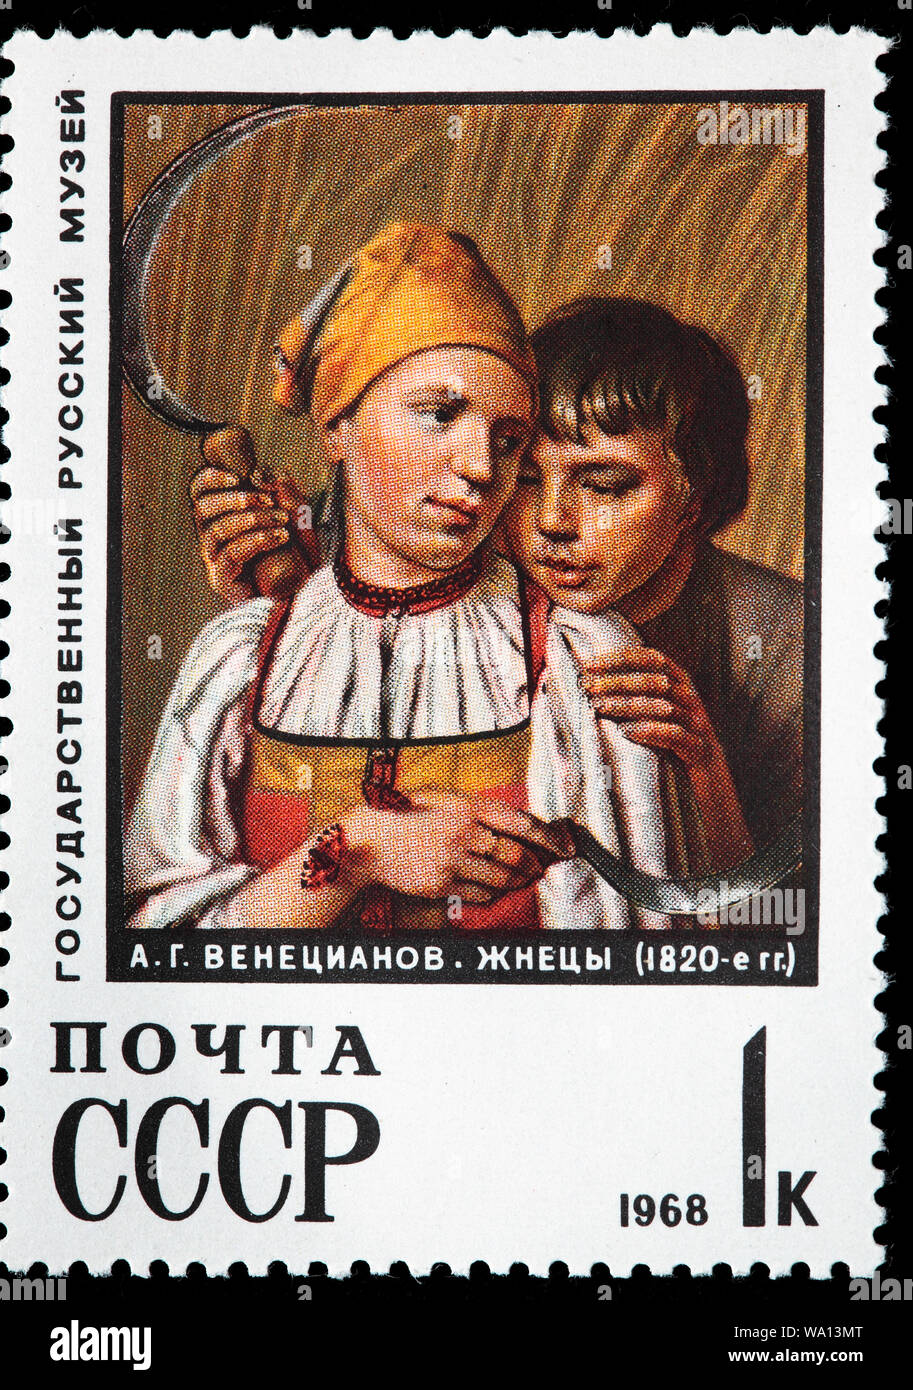 The Reapers (1820), painting by Alexey Venetsianov (1780-1847), postage stamp, Russia, USSR, 1968 Stock Photo